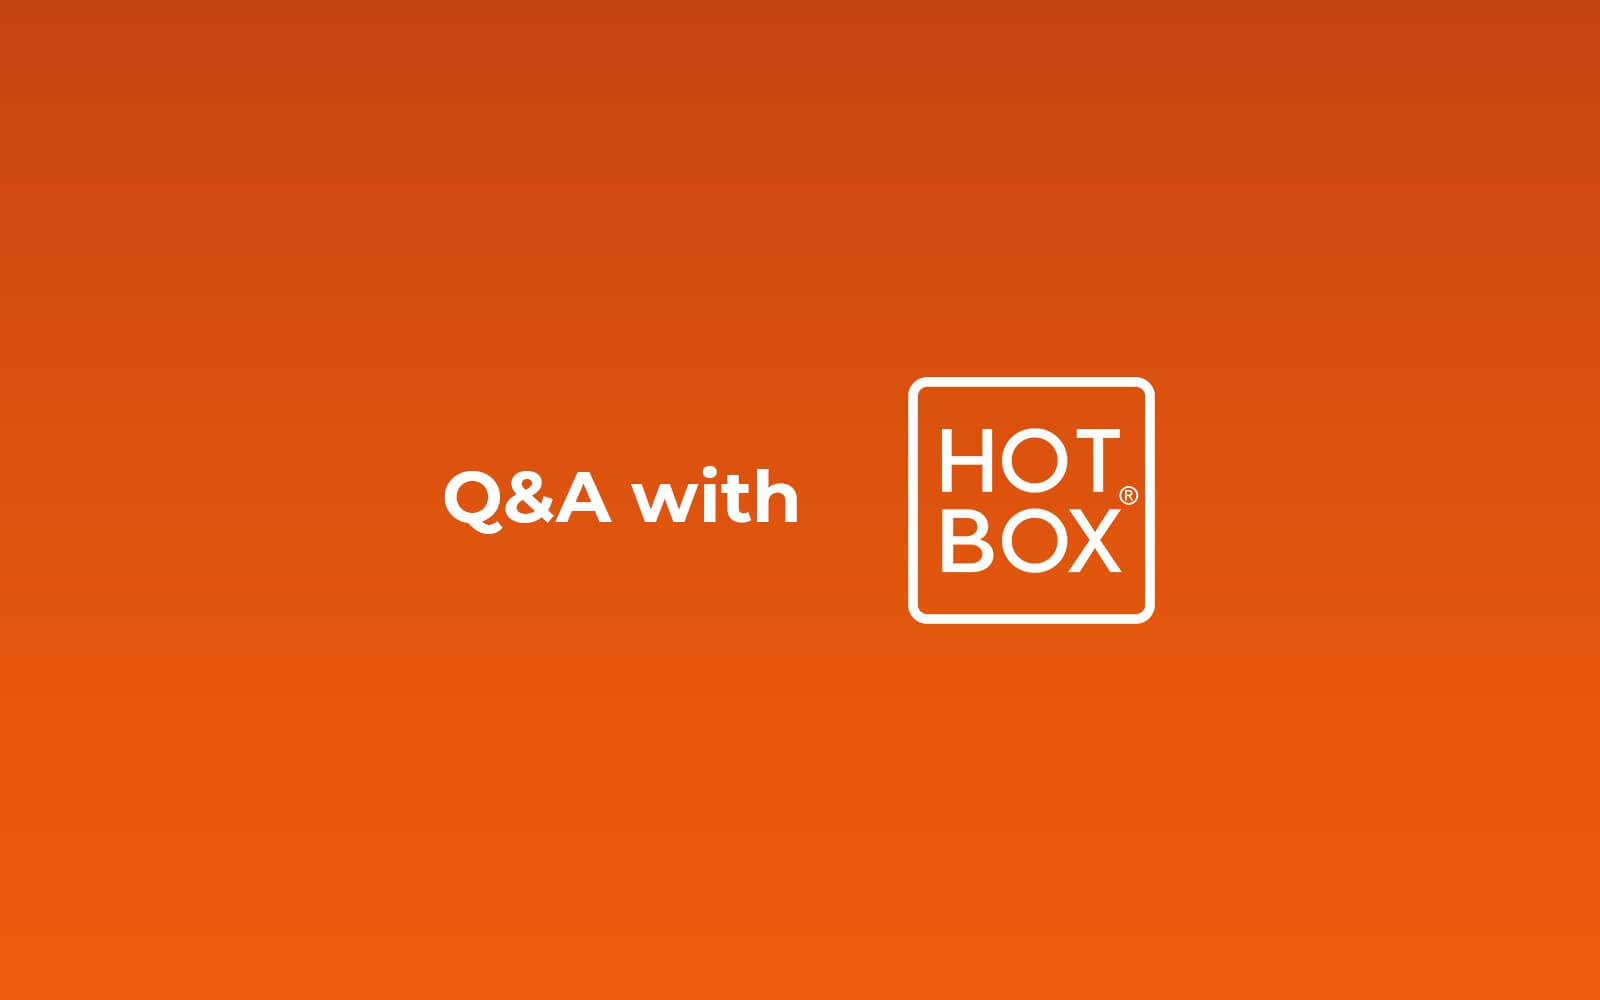 Q&A with Hotbox